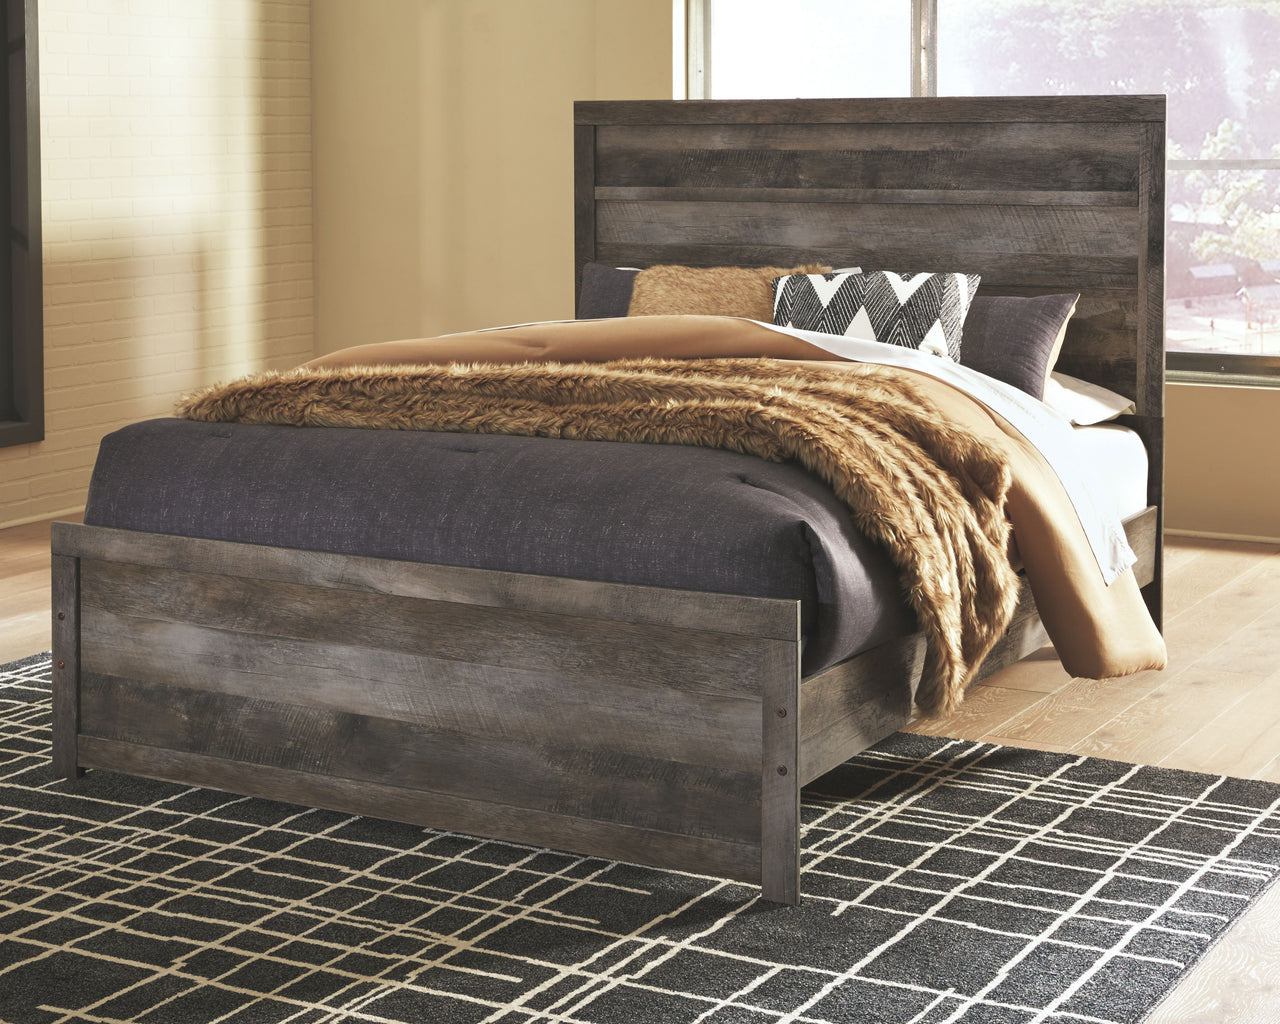 Wynnlow - Panel Bed - Tony's Home Furnishings